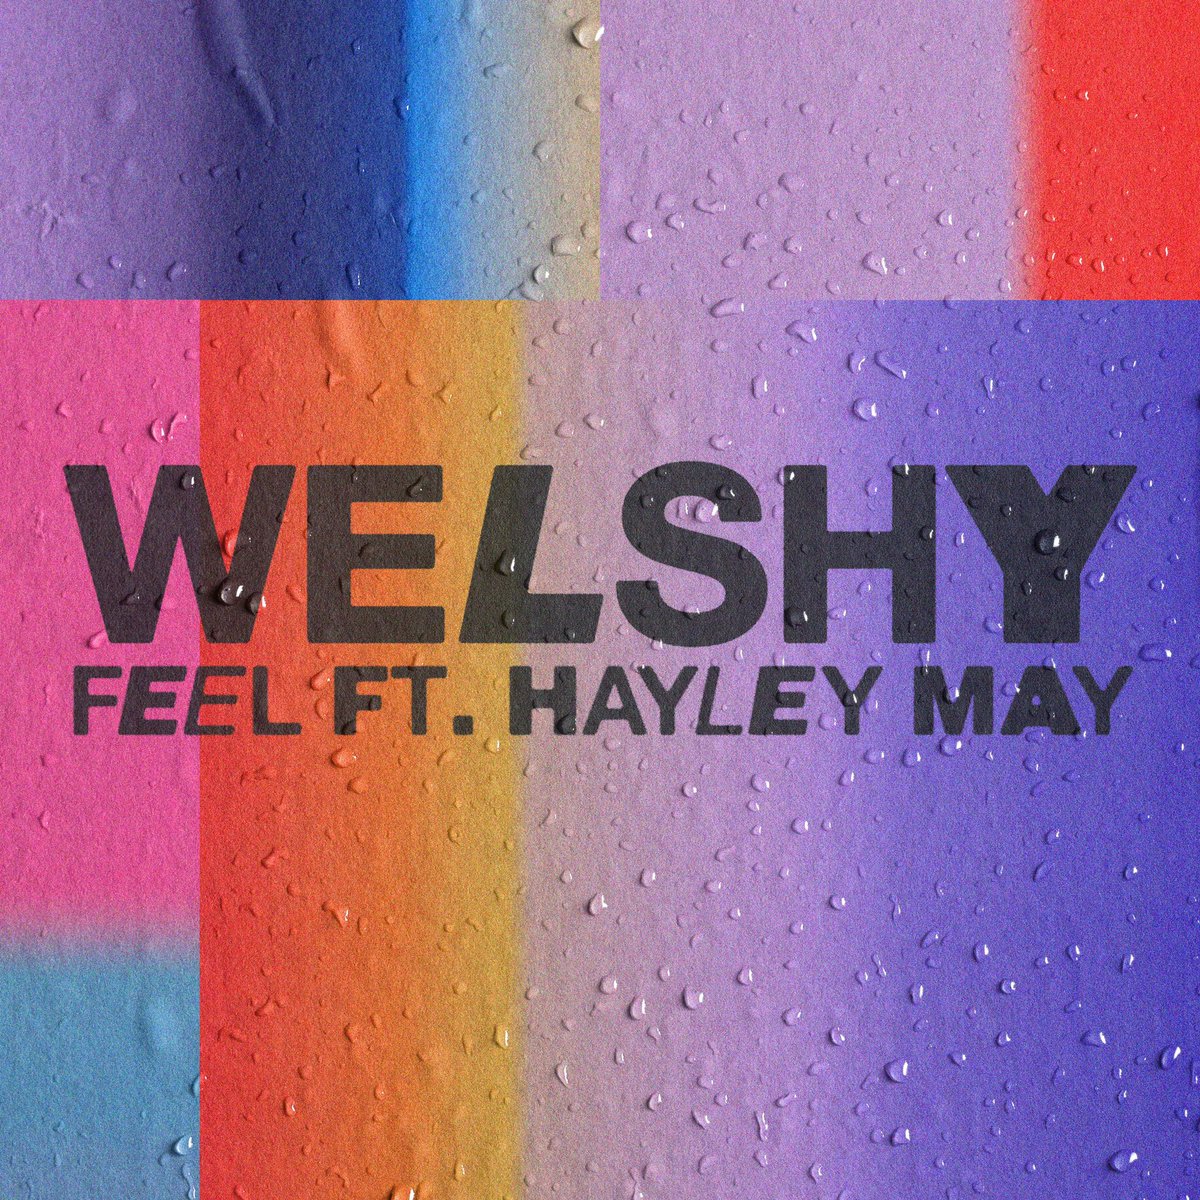 I’m thrilled to announce that my new single Feel, featuring the incredibly talented Hayley May, will be out next Friday 5th April. This one’s been in the making for quite some time now and it holds a special place in my heart. Pre-save link in bio: Welshy.lnk.to/feel